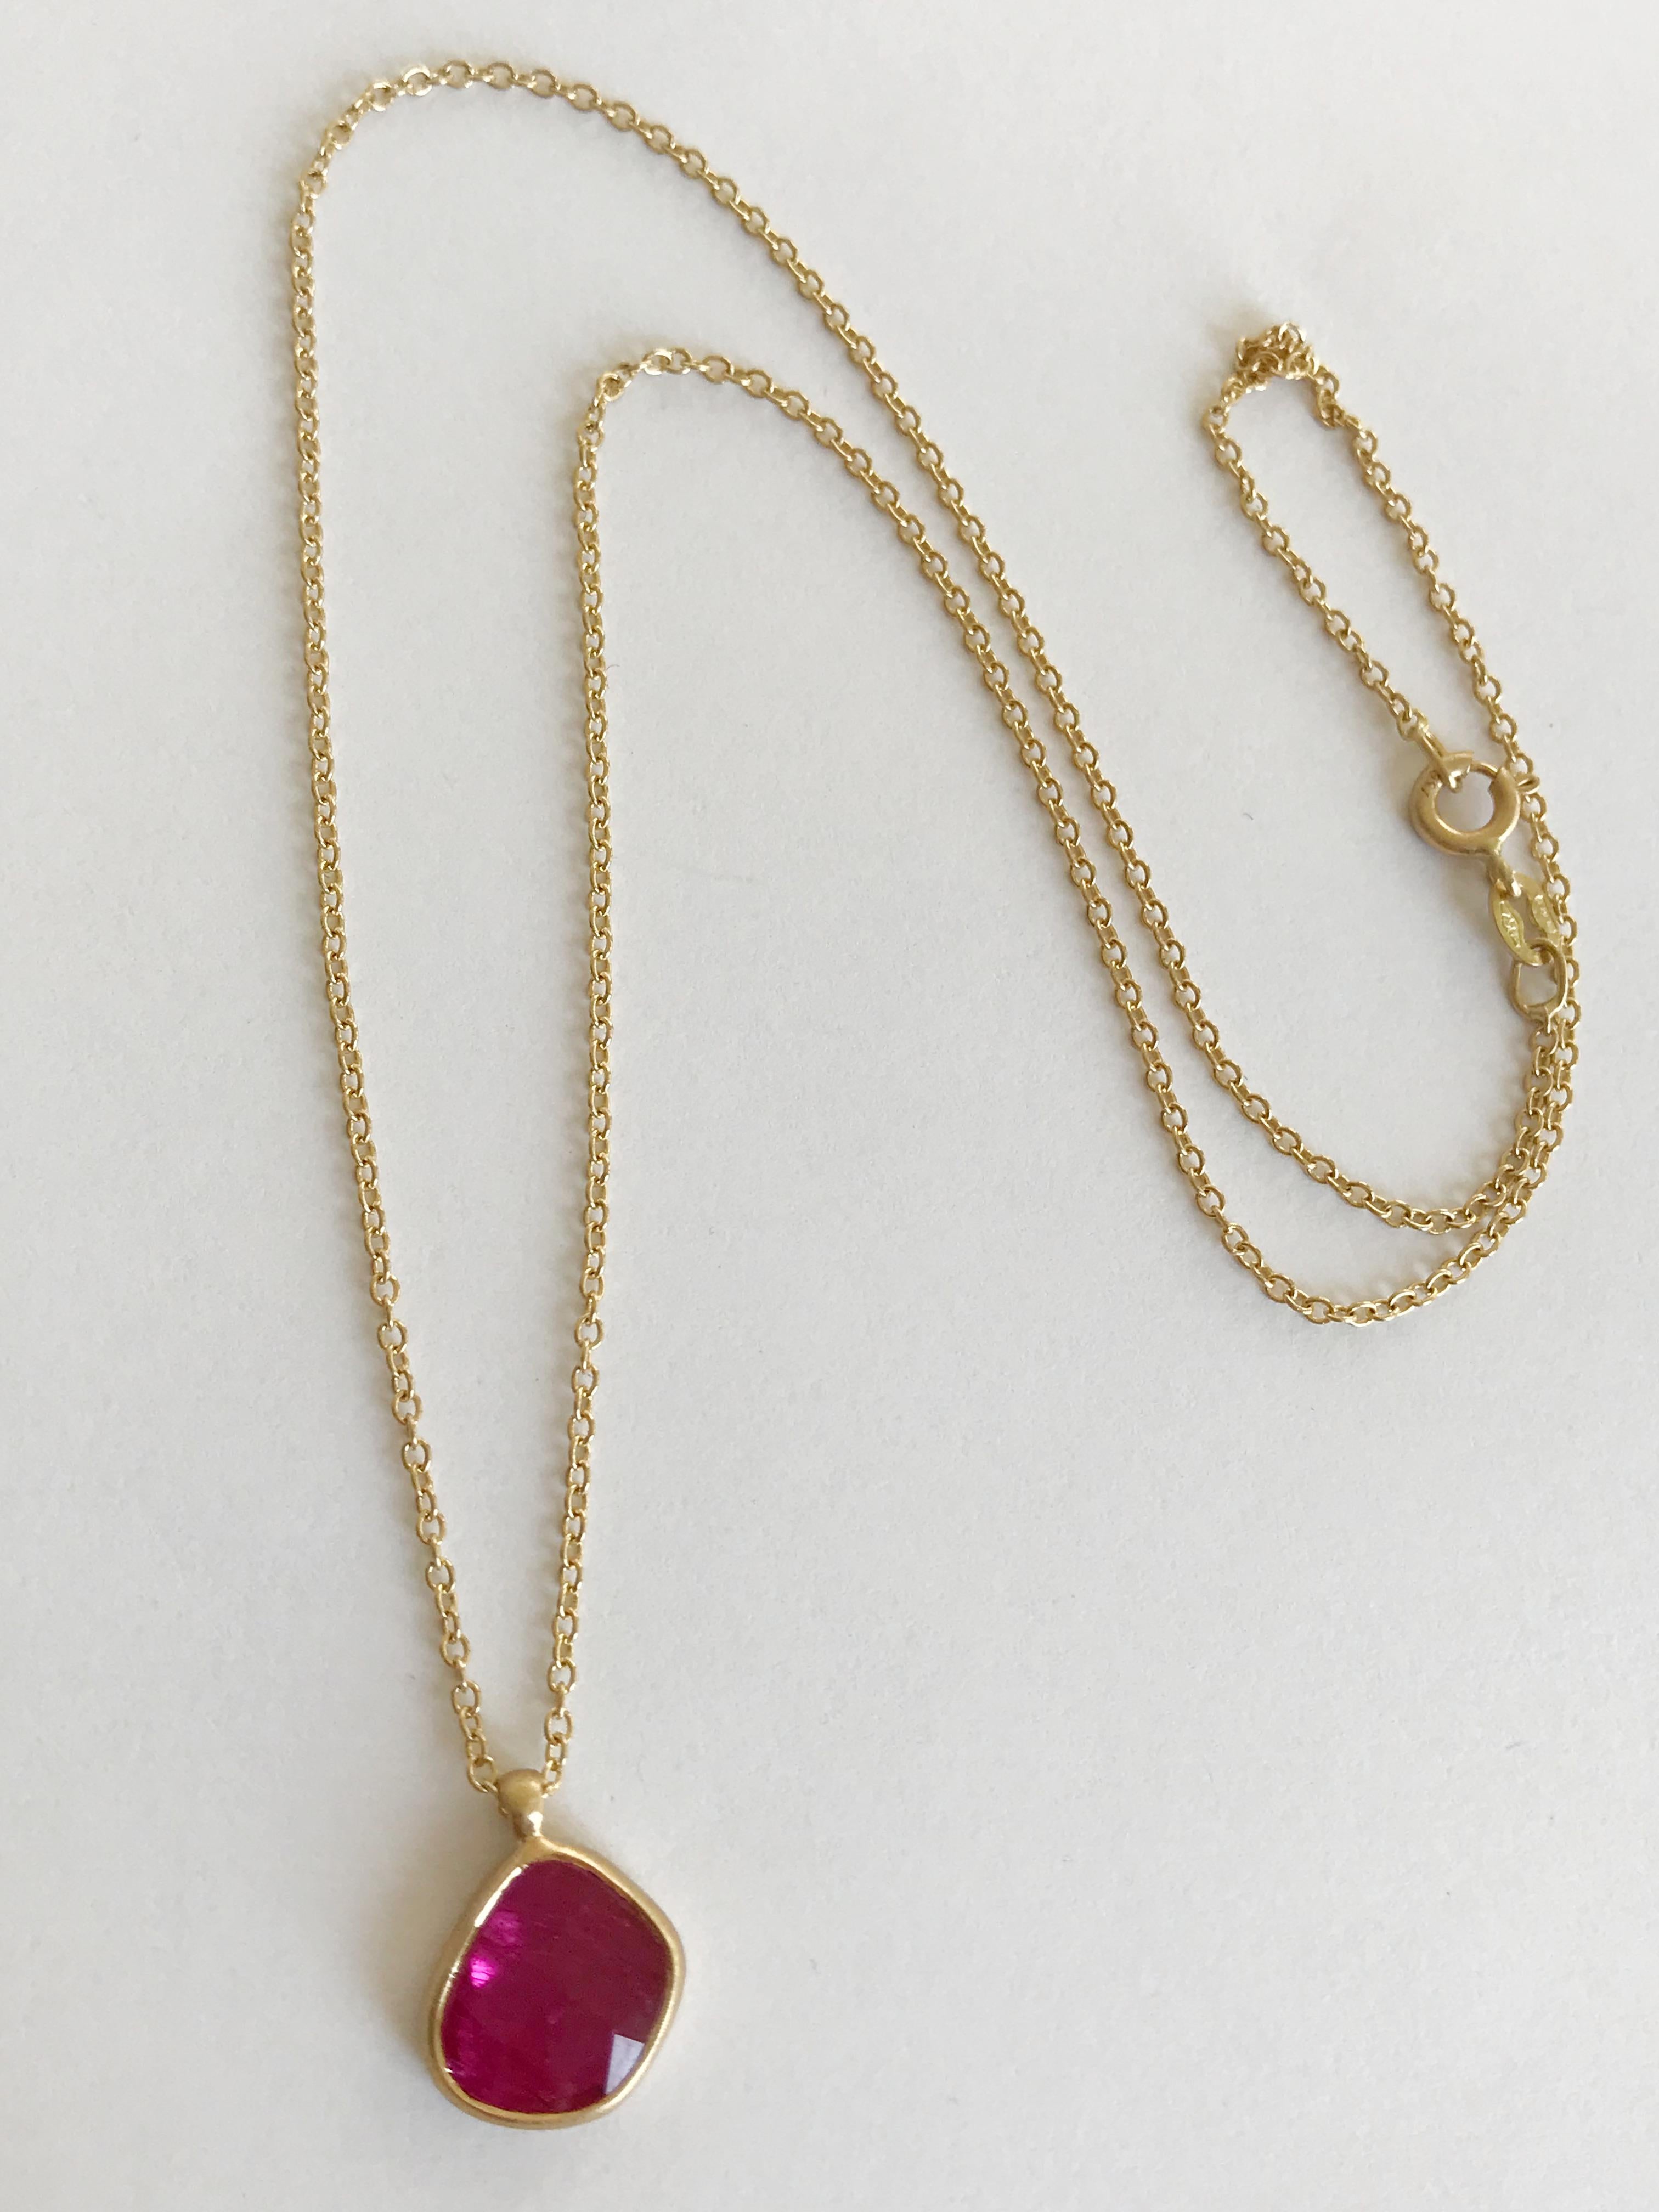 Dalben design One of a Kind 18k yellow gold matte finishing necklace with one bezel-set irregular drop shape rose cut slice ruby weight 1,5 carat. 
pendant dimension : 
width 11 mm 
height 11,4 mm 
Chain length 40,5 cm resizable
The necklace has